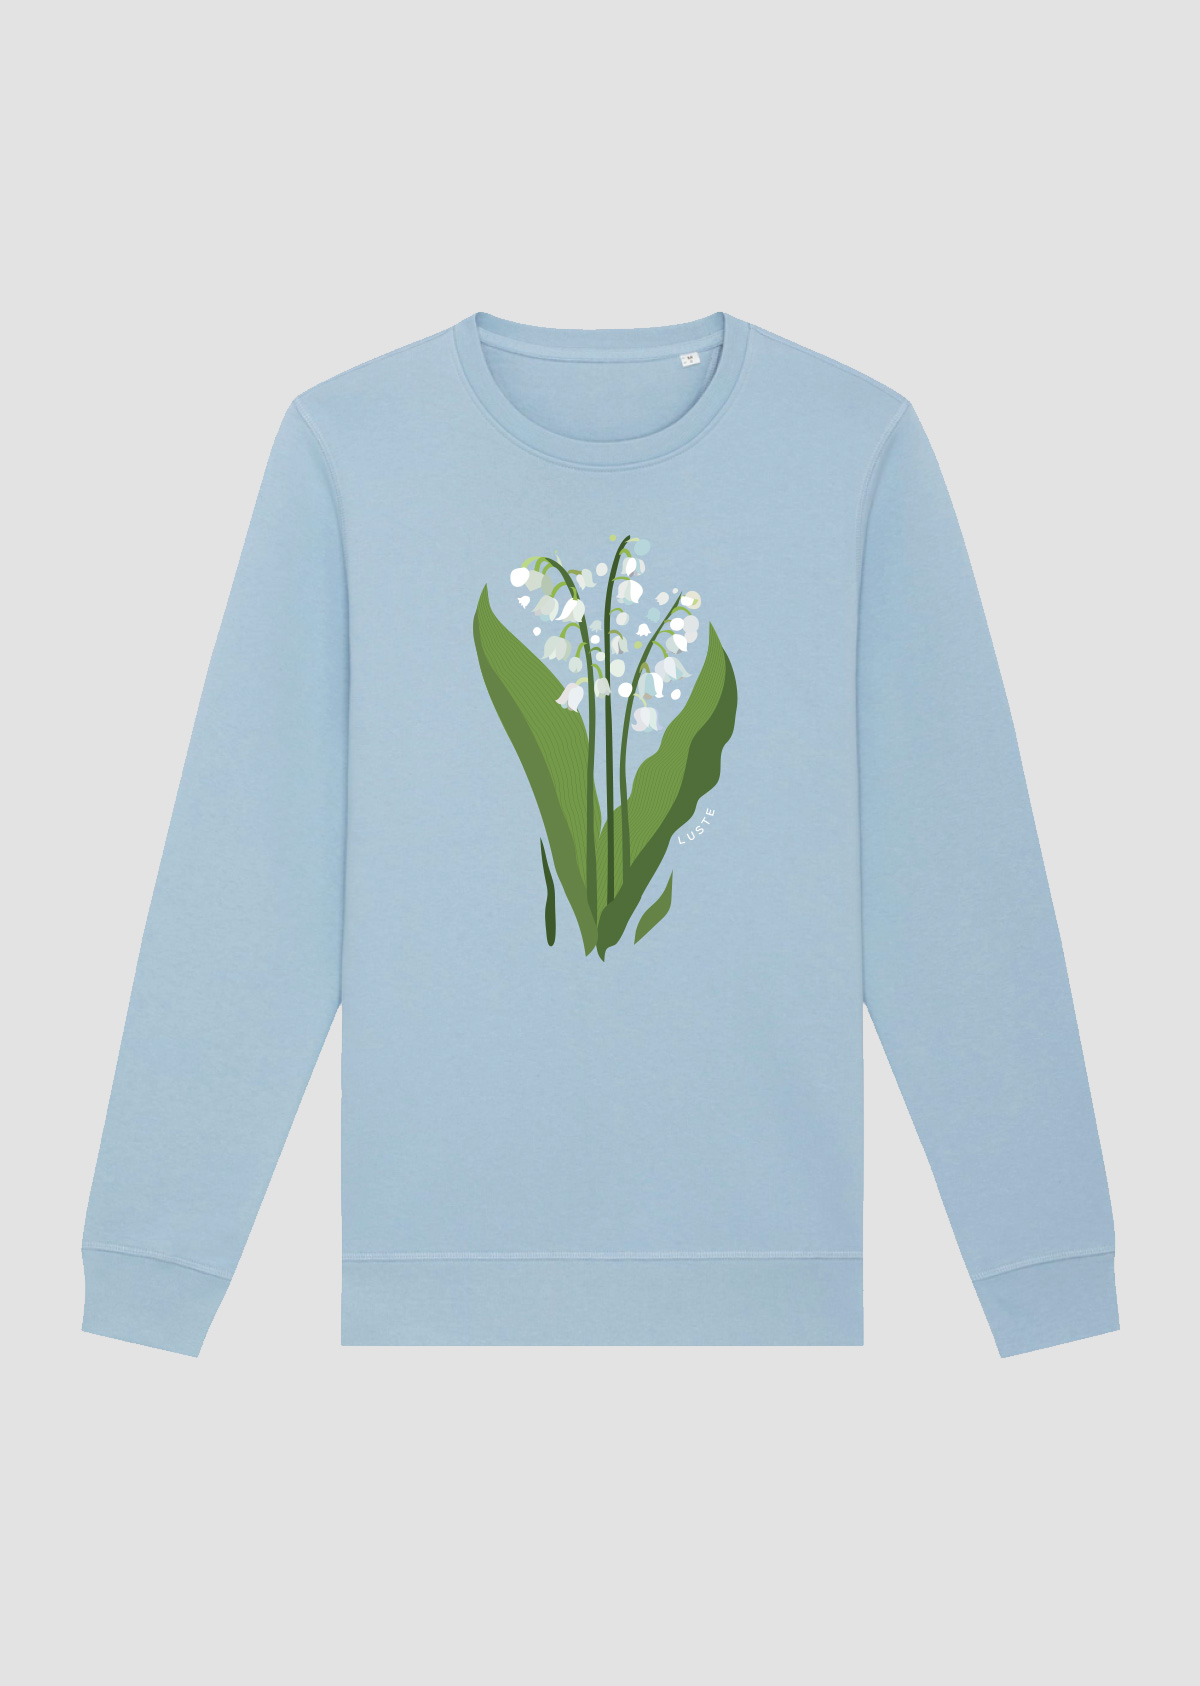 Sweatshirt "Charming Lily of the Valley"